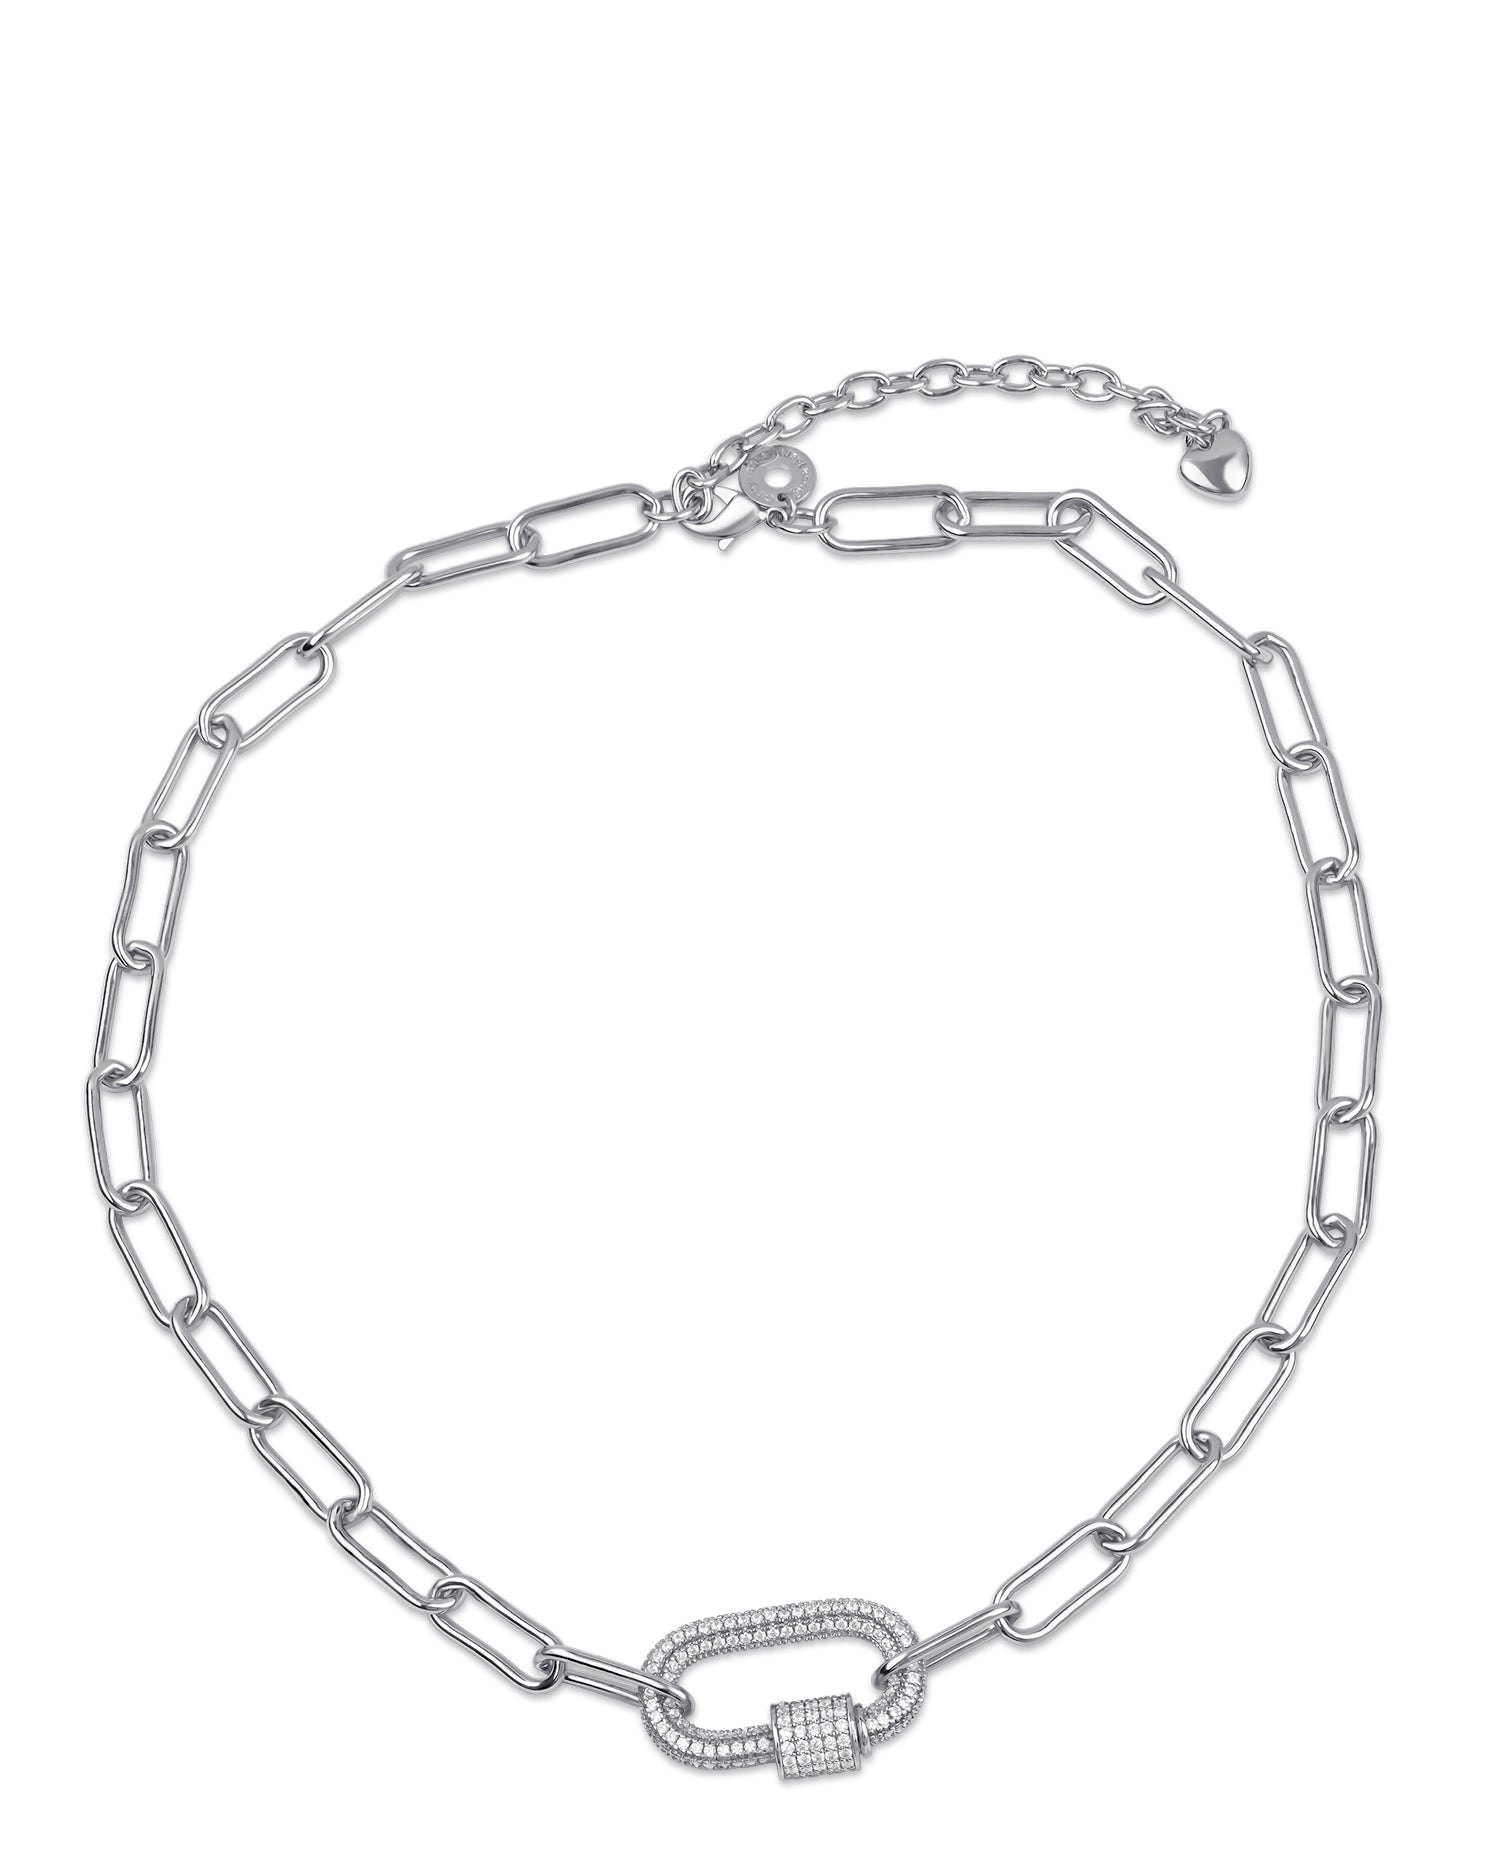 Oval Chain Link with Lock Pendant